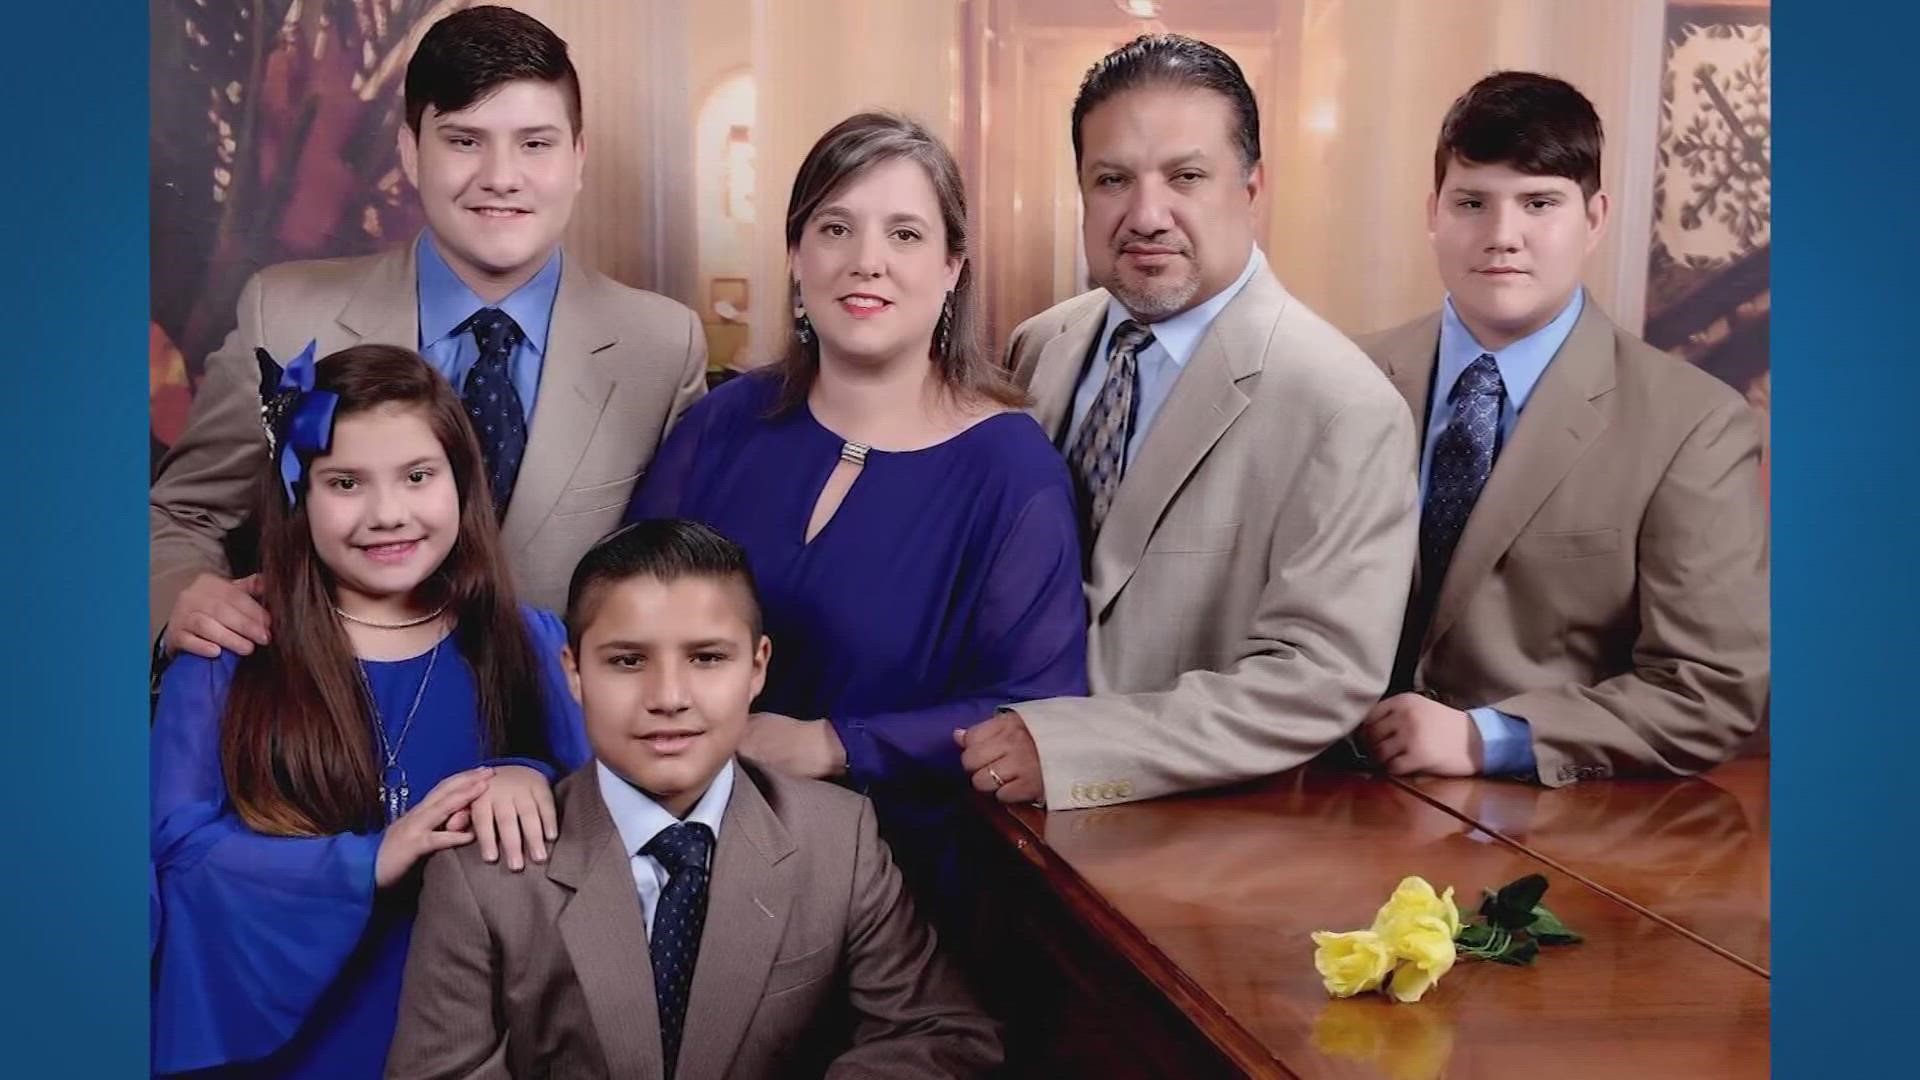 Lydia and Lawrence Rodriguez died two weeks apart. They had been married for 21 years and are survived by their four children.